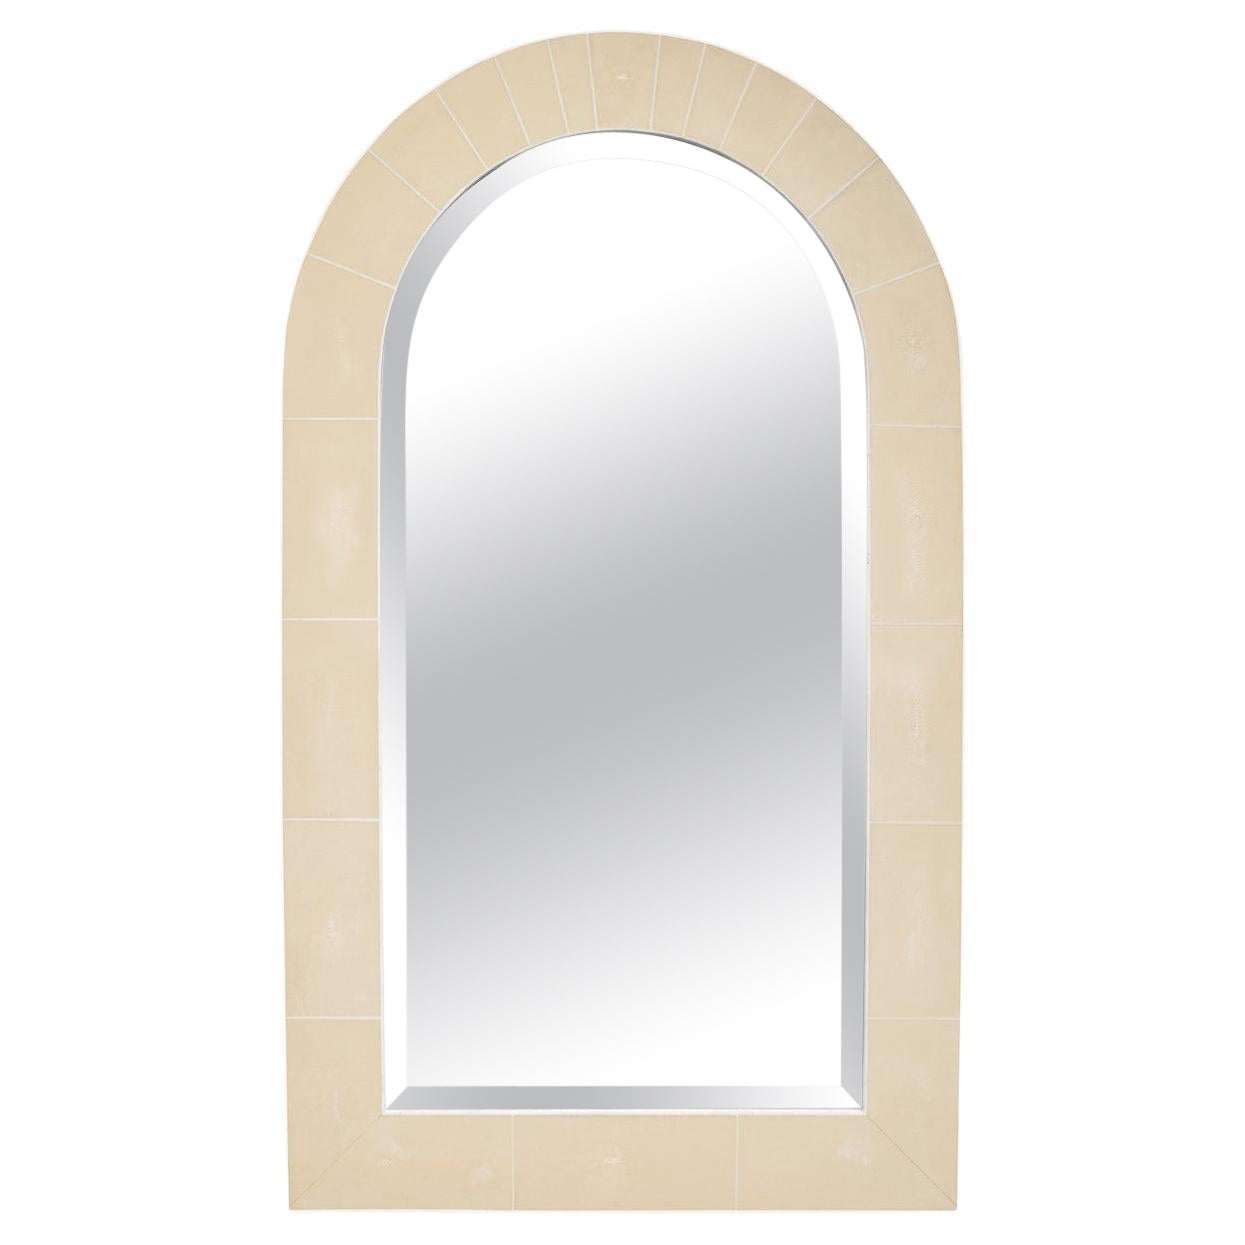 Karl Springer Superb "Dome Top Mirror" in Ivory Shagreen with Bone Inlays 1980s For Sale